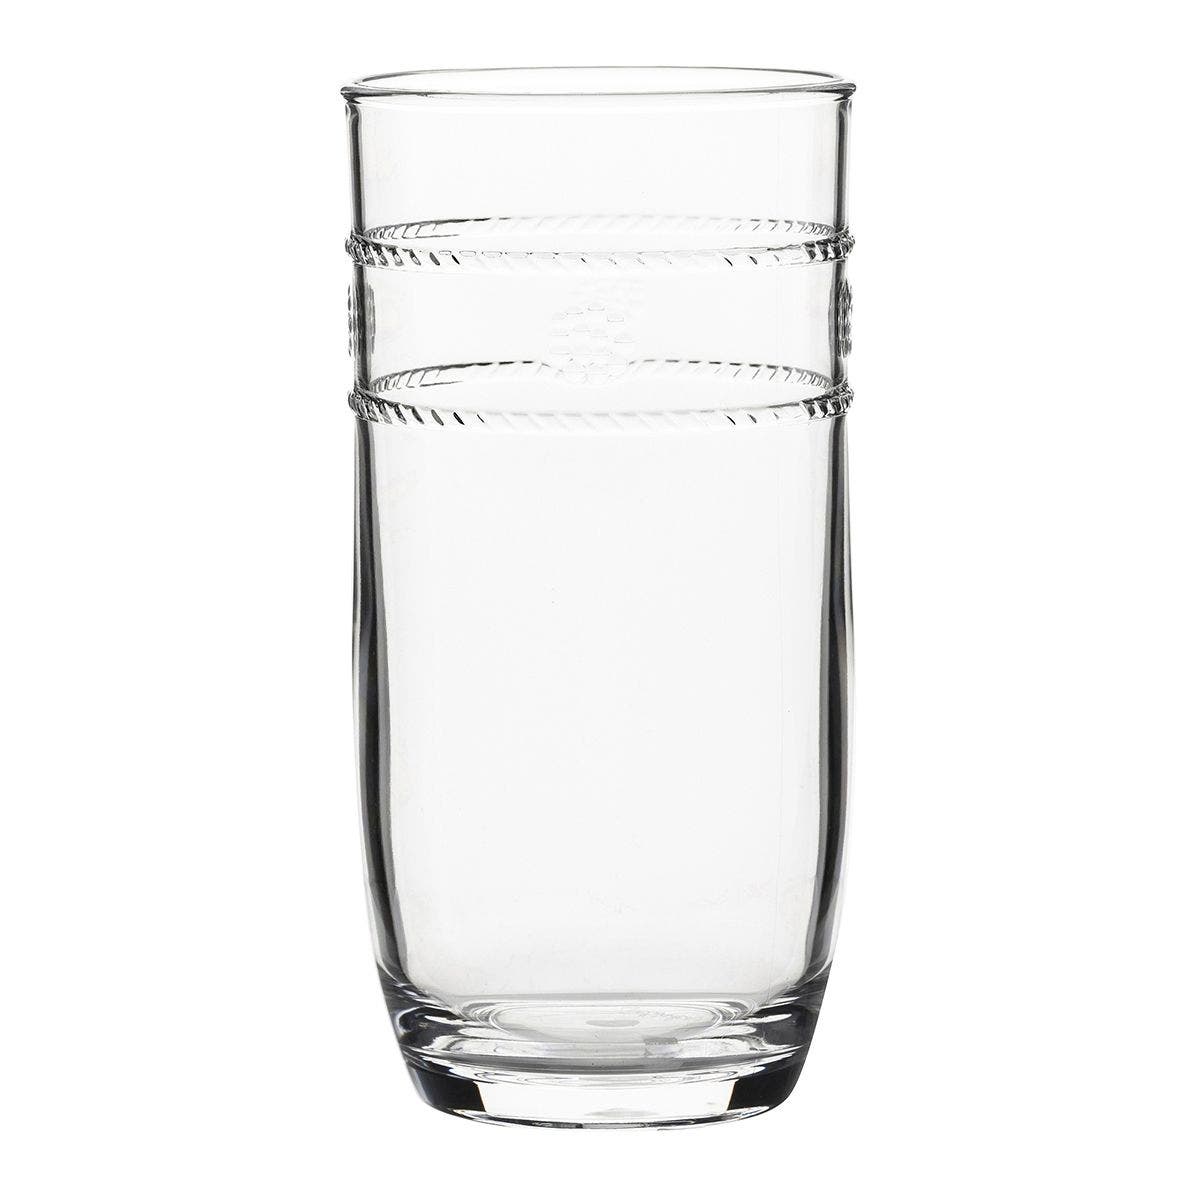 GLASS BEVERAGE ACRYLIC CLEAR LARGE